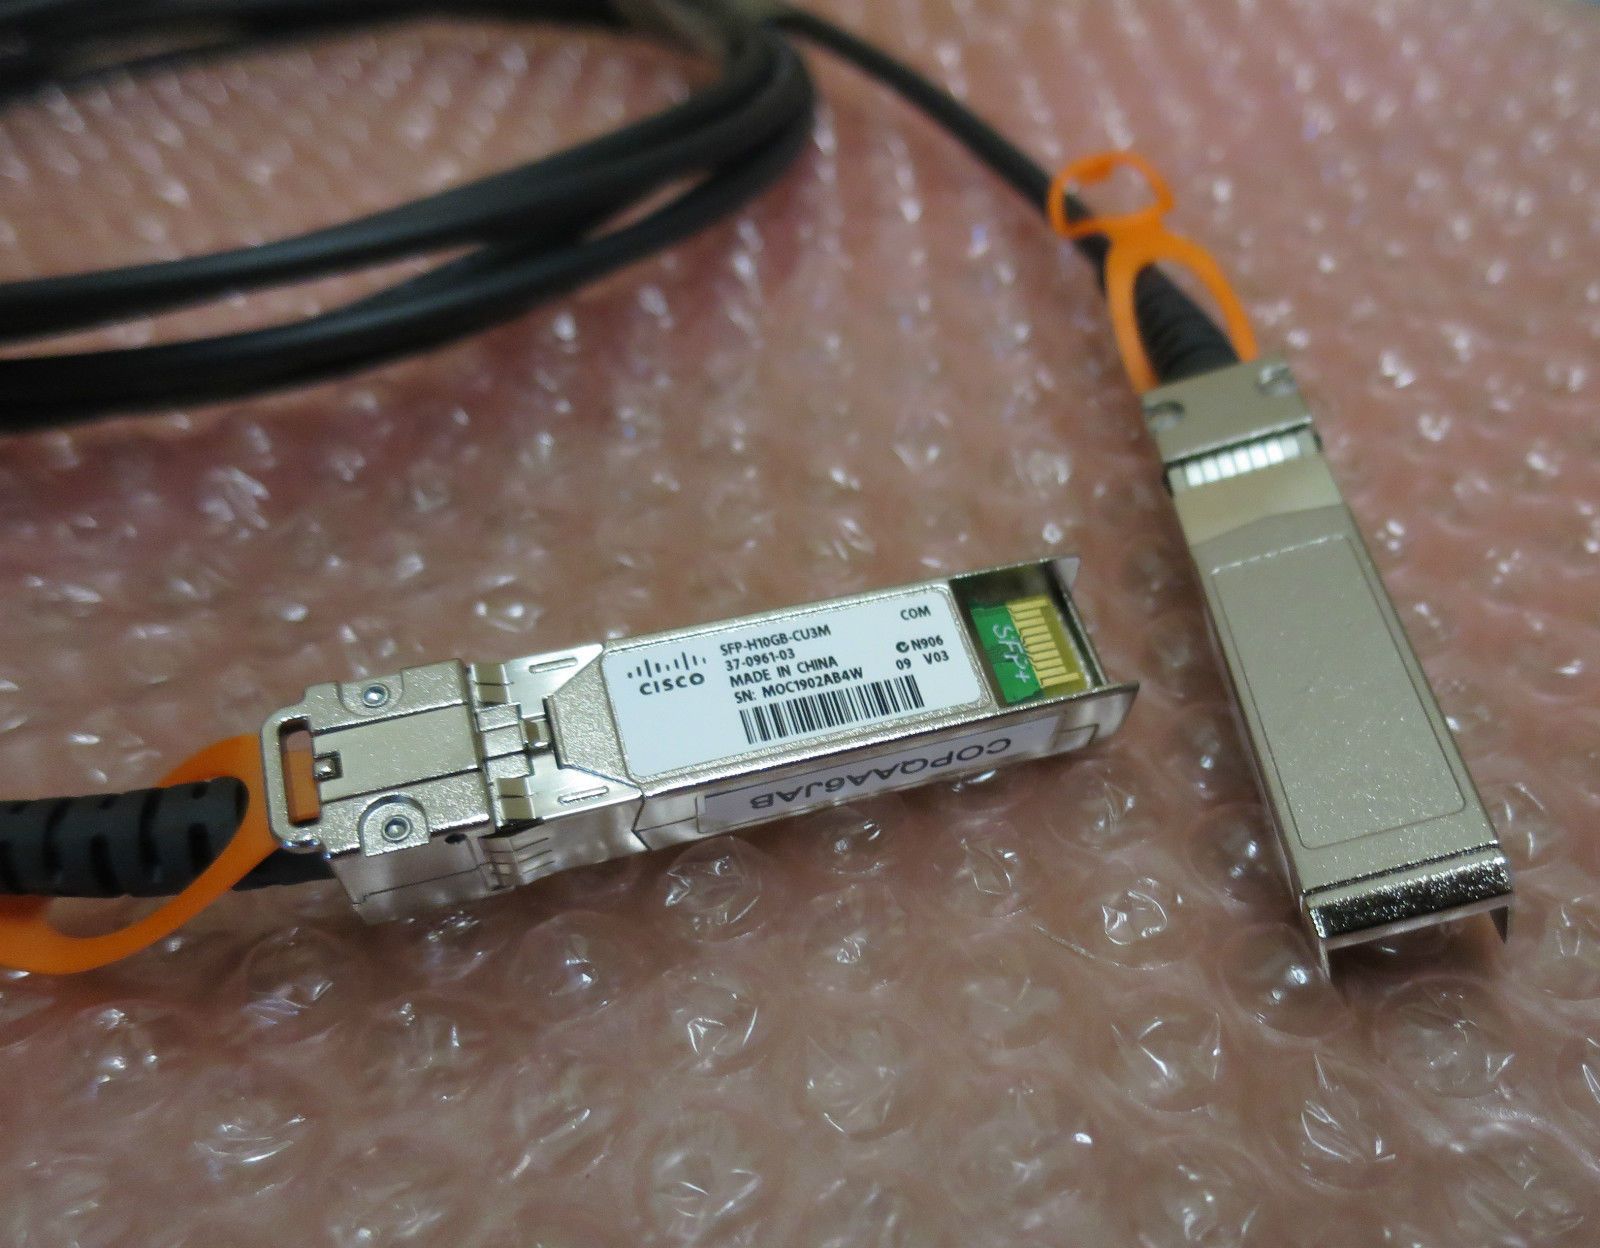 Cable transceiver stacking CISCO STP-H10GB-CU3M SFP + COOPER TWINAXIAL CABLE 3 metros